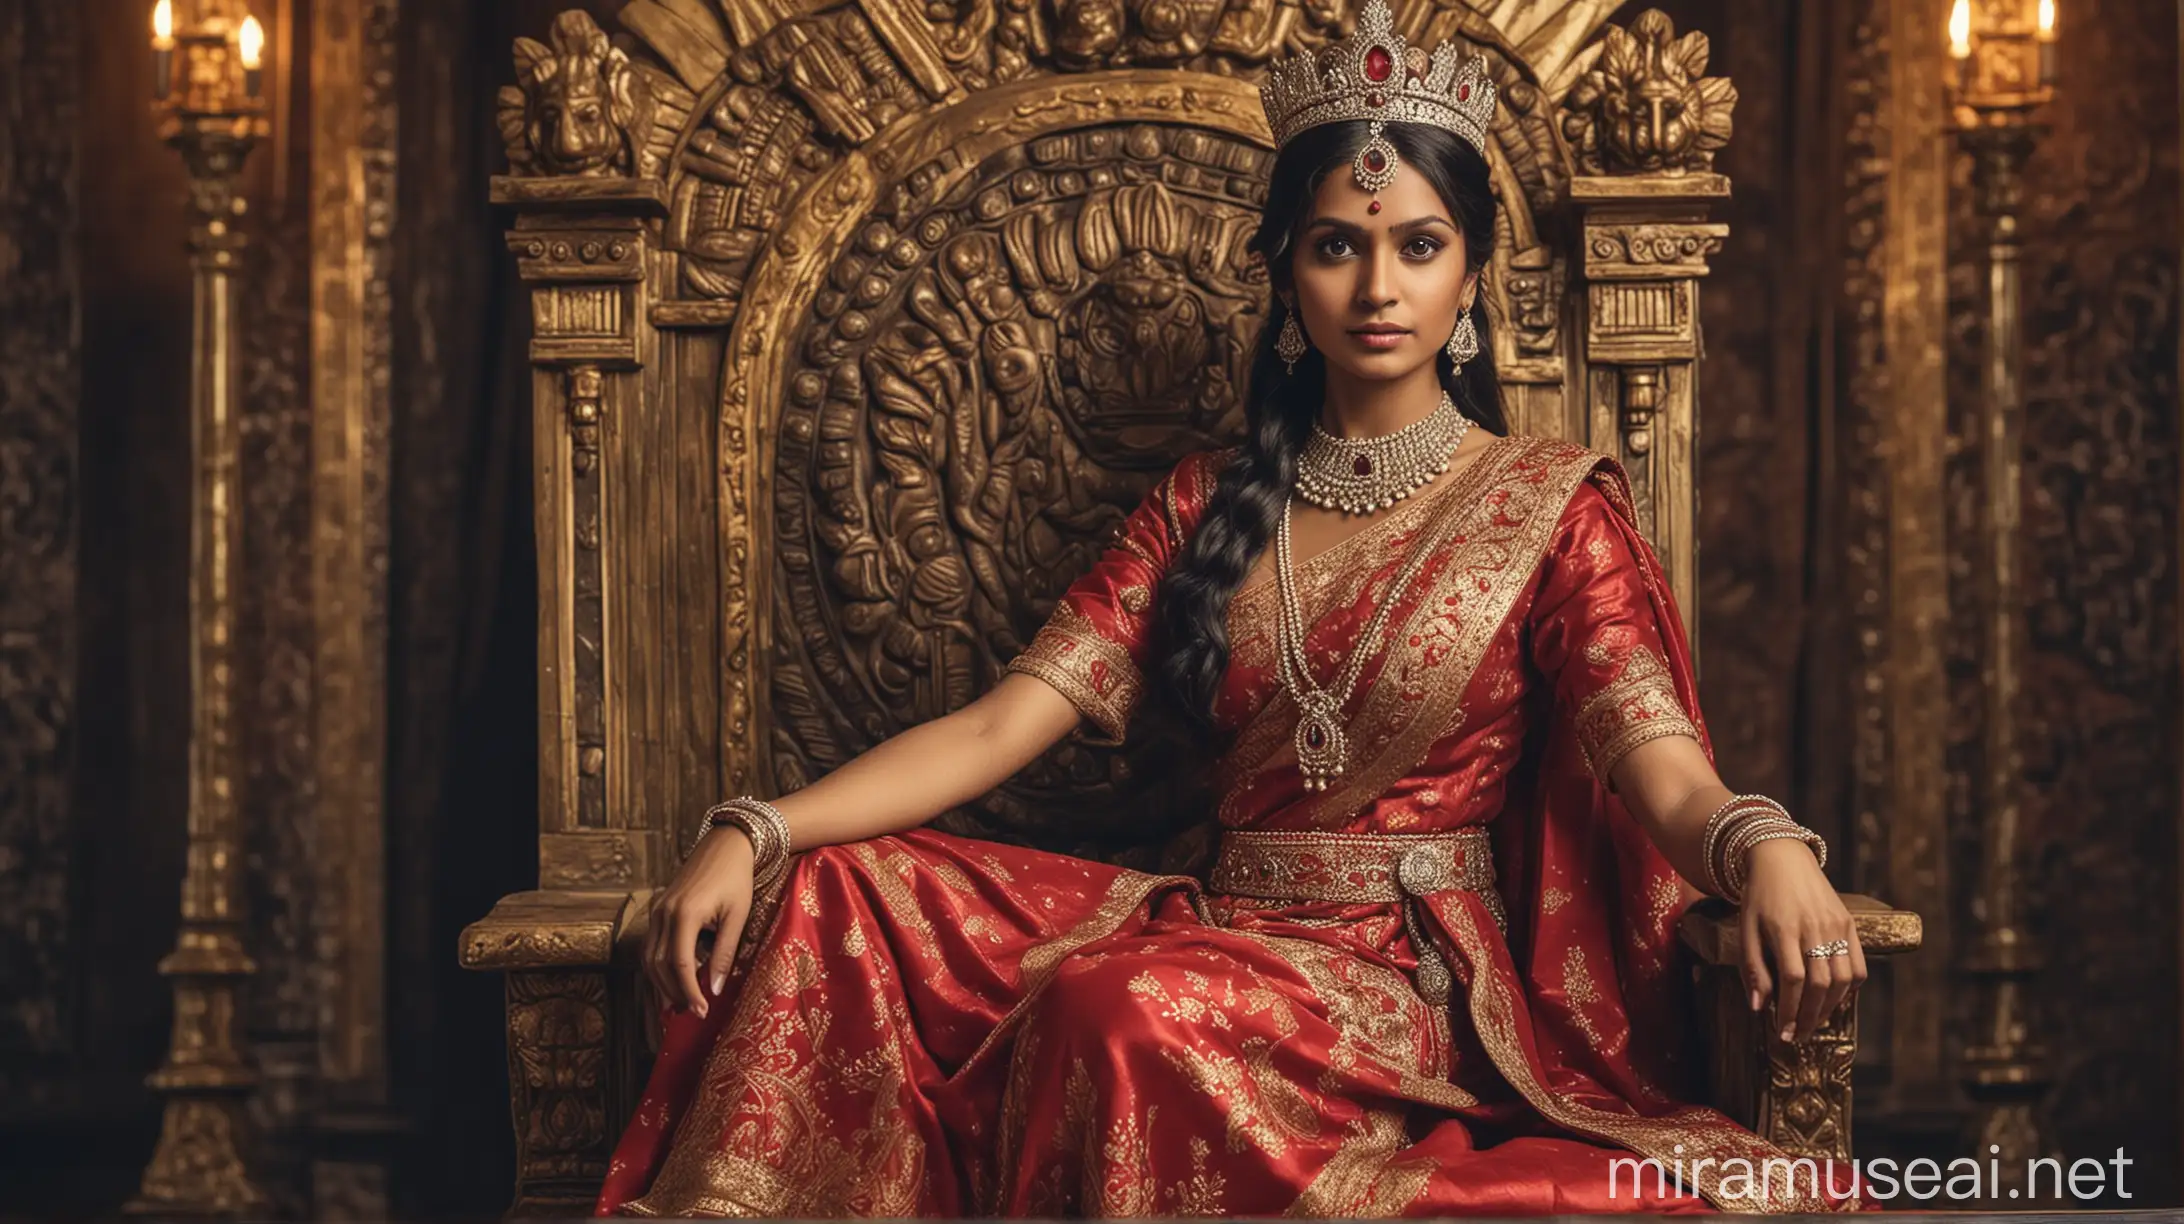 Regal Indian Queen on Ornate Throne